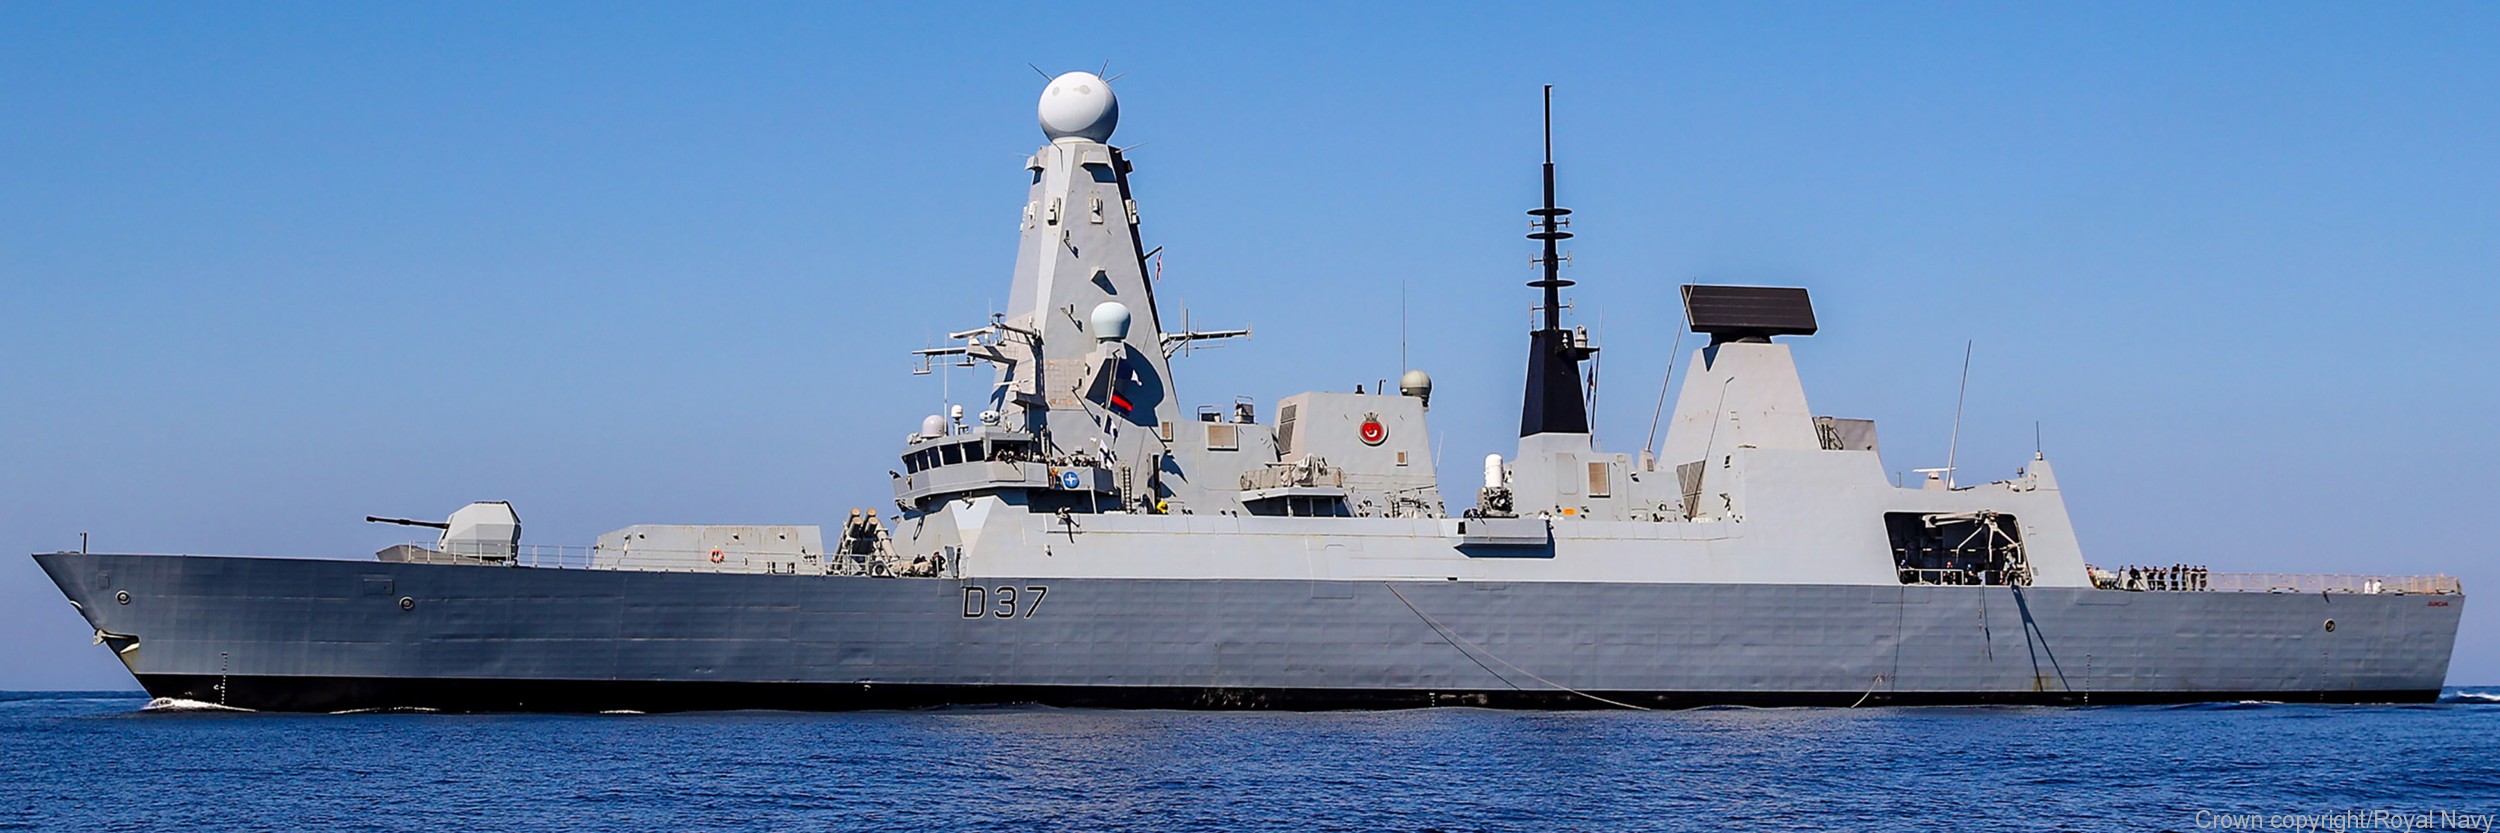 hms duncan d-37 type 45 daring class guided missile destroyer ddg royal navy sea viper paams 46